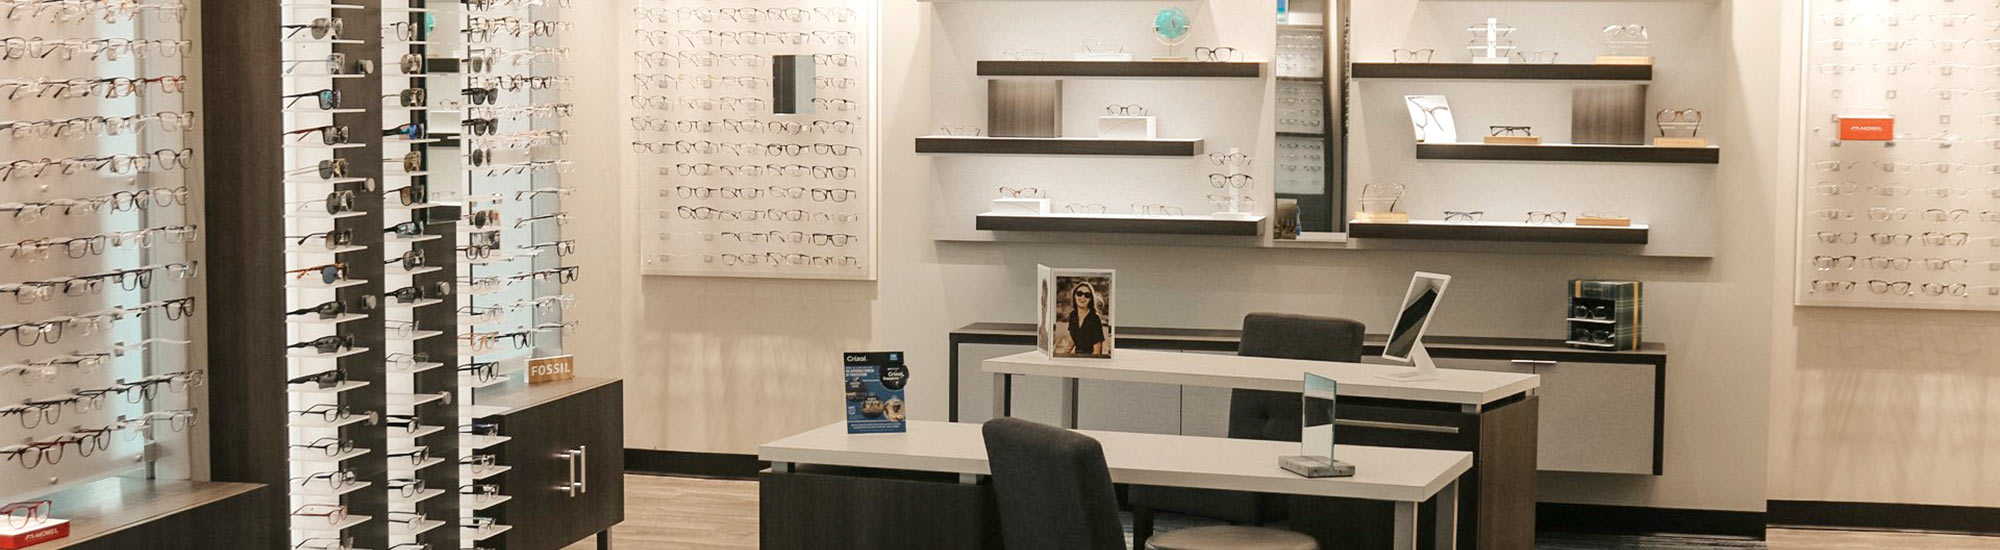 Meet the Vestavia Eye Care Doctors and Staff